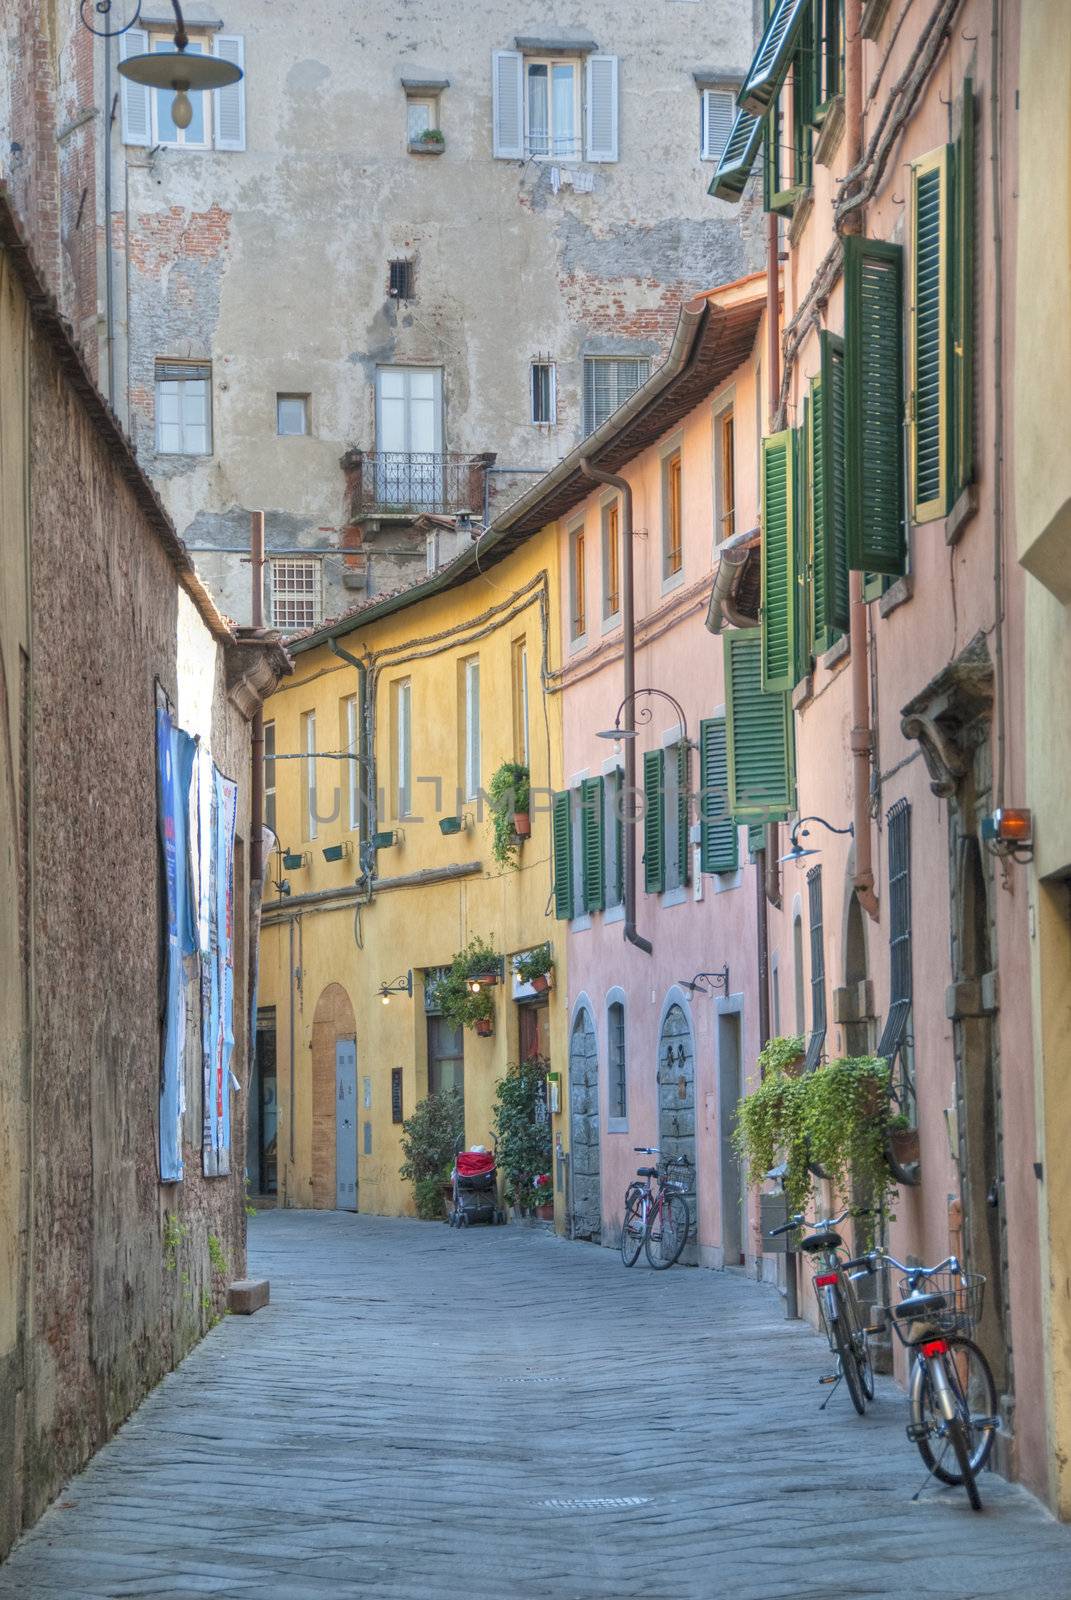 Typical Tuscan Street, Lucca, Italy, October 2009 by jovannig